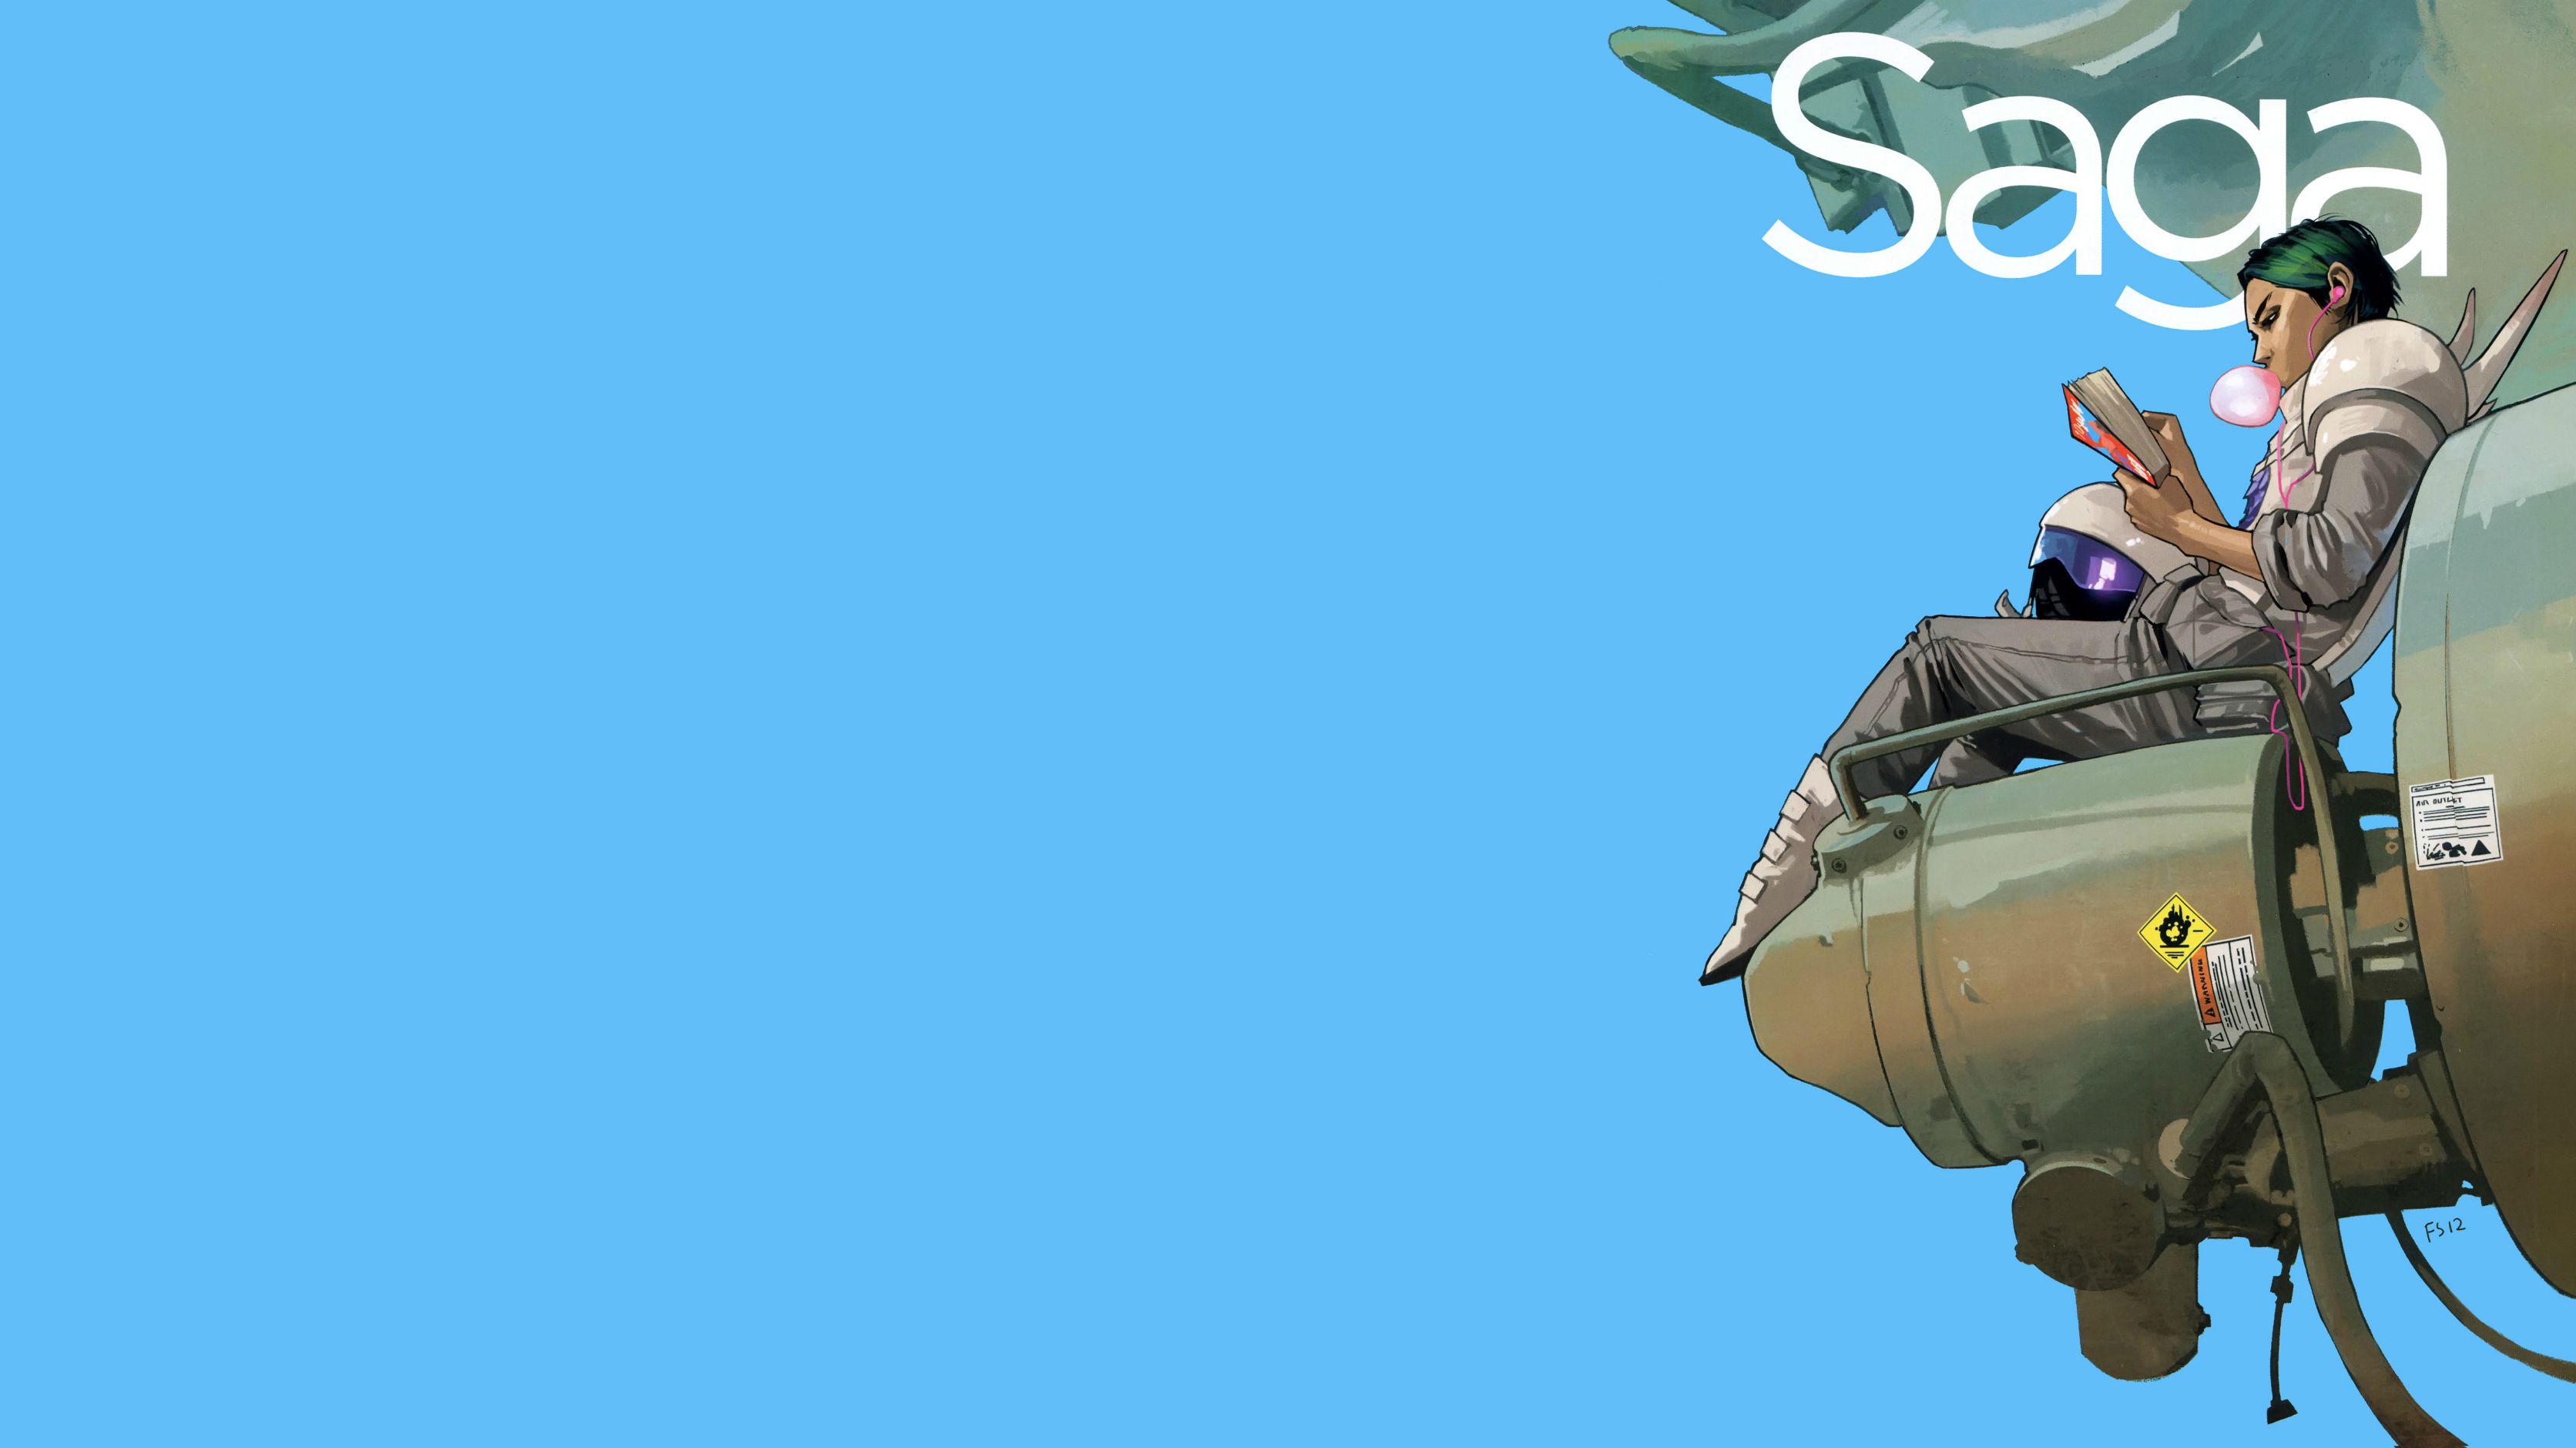 Made A Wallpaper Out Of The Cover To Saga Not Sure